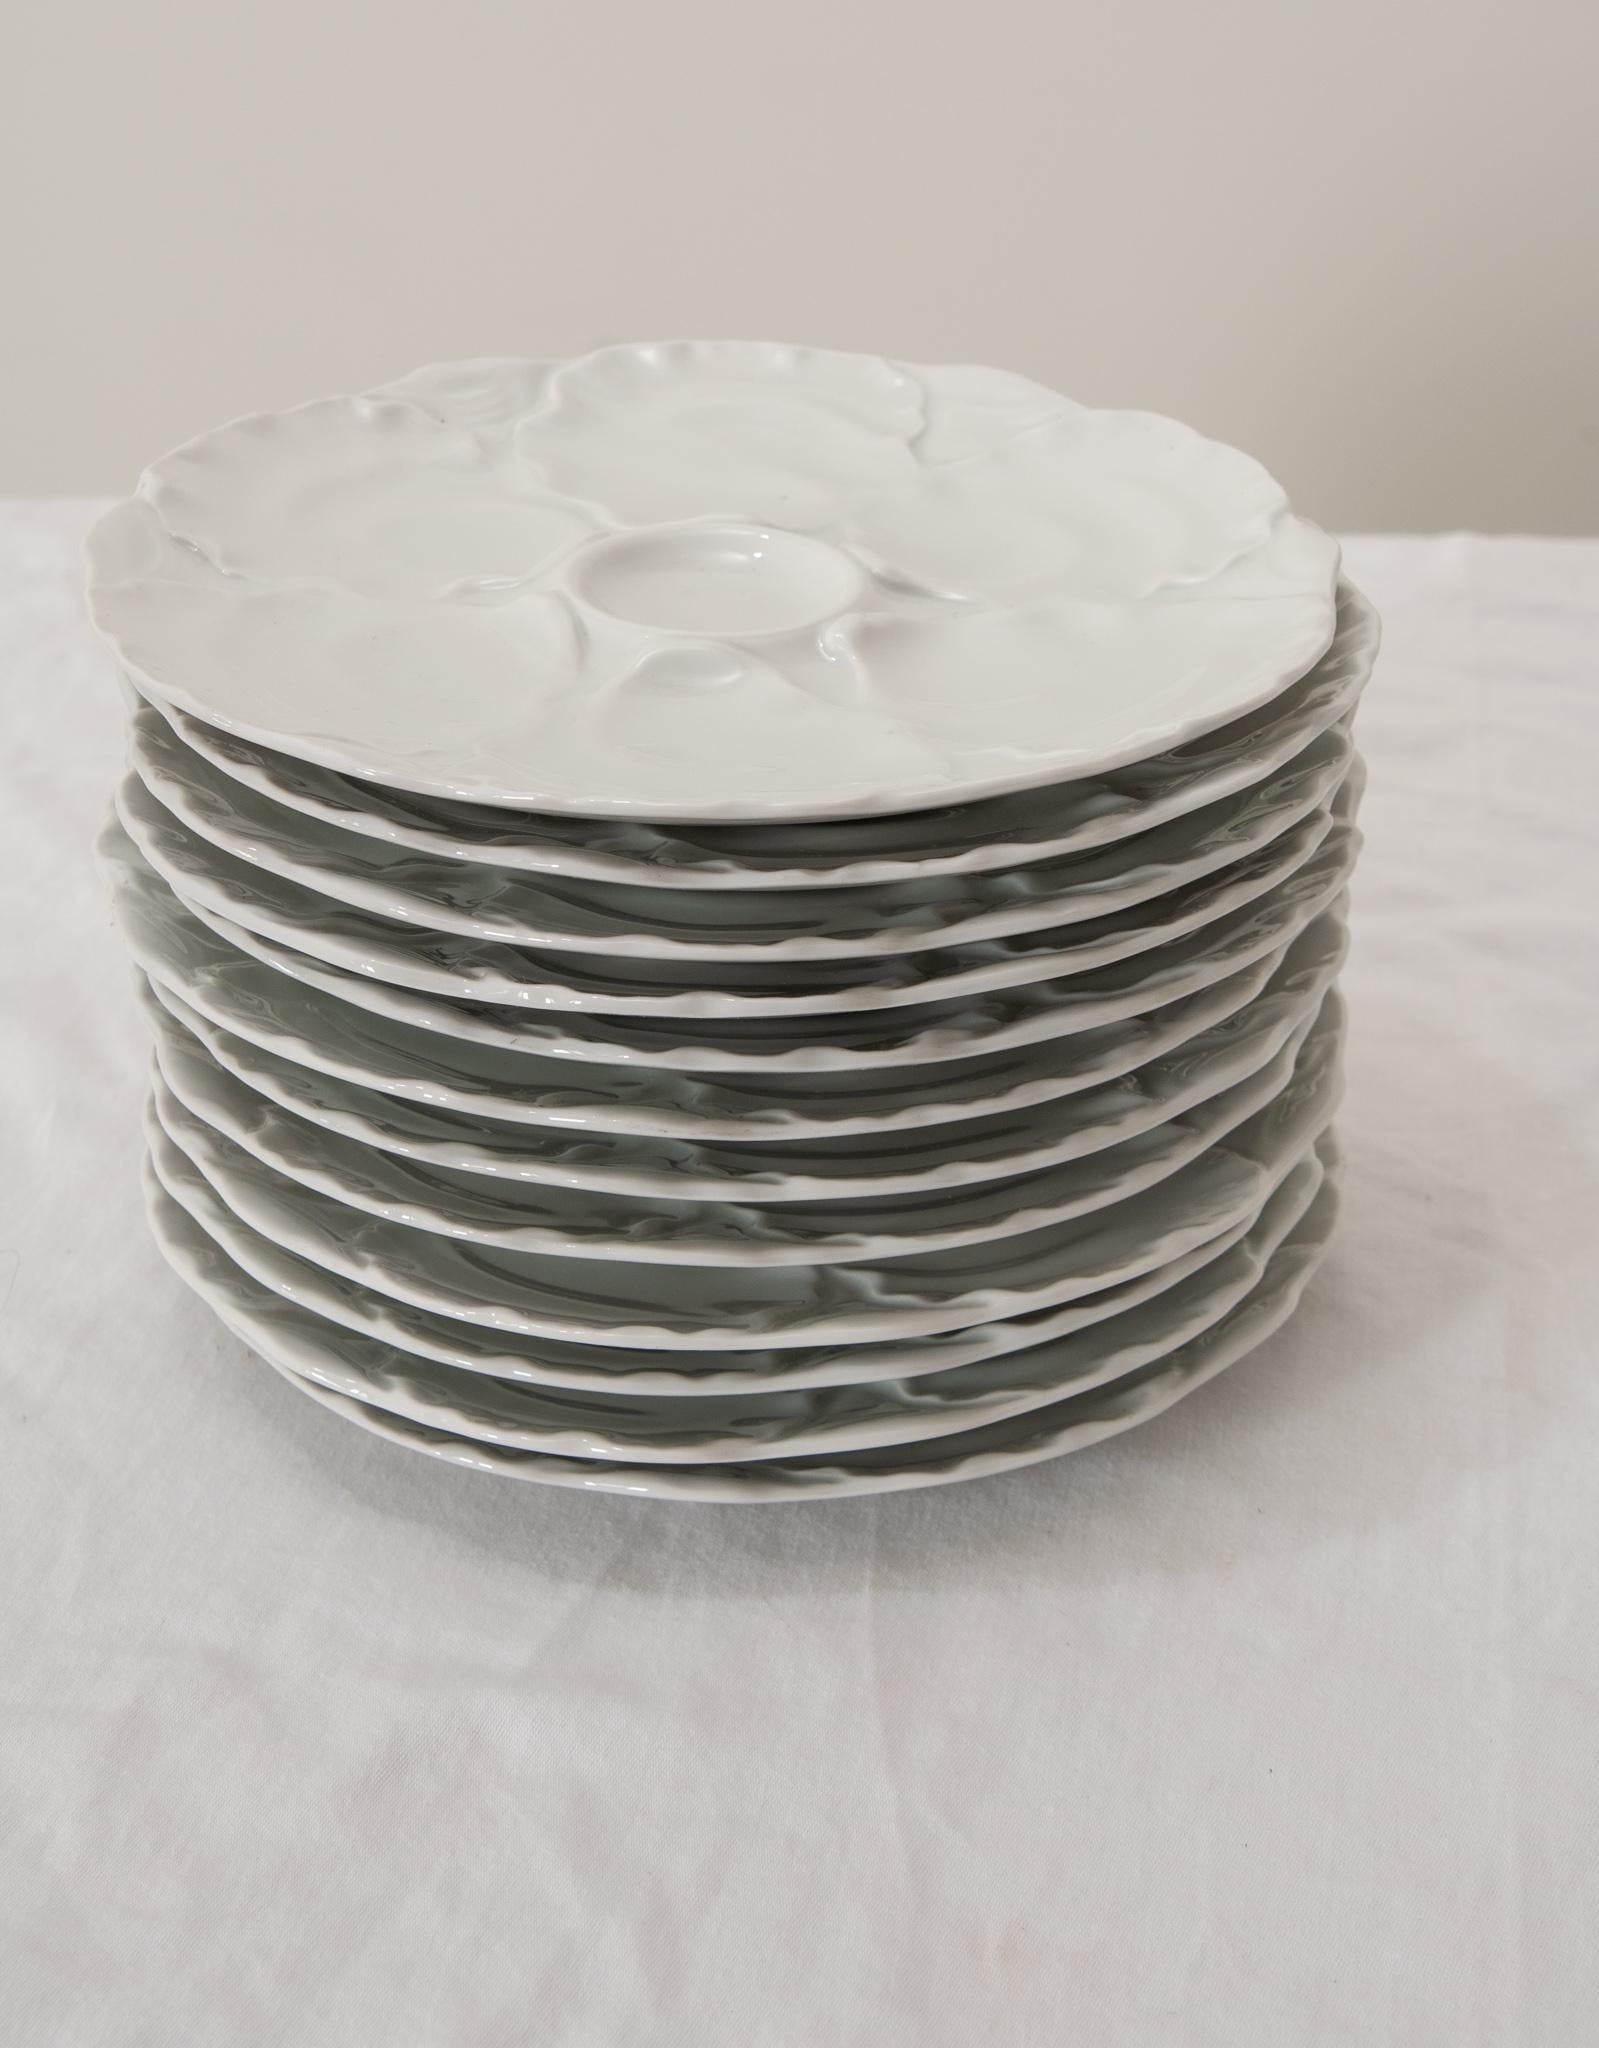 An elegant set of twelve French white oyster plates made by Hutschenreuther Porcelain in Germany during the 20th Century. These plates are fabulous with glossy molded and shaped centers and fluted edges. The maker's stamp can be found on the reverse